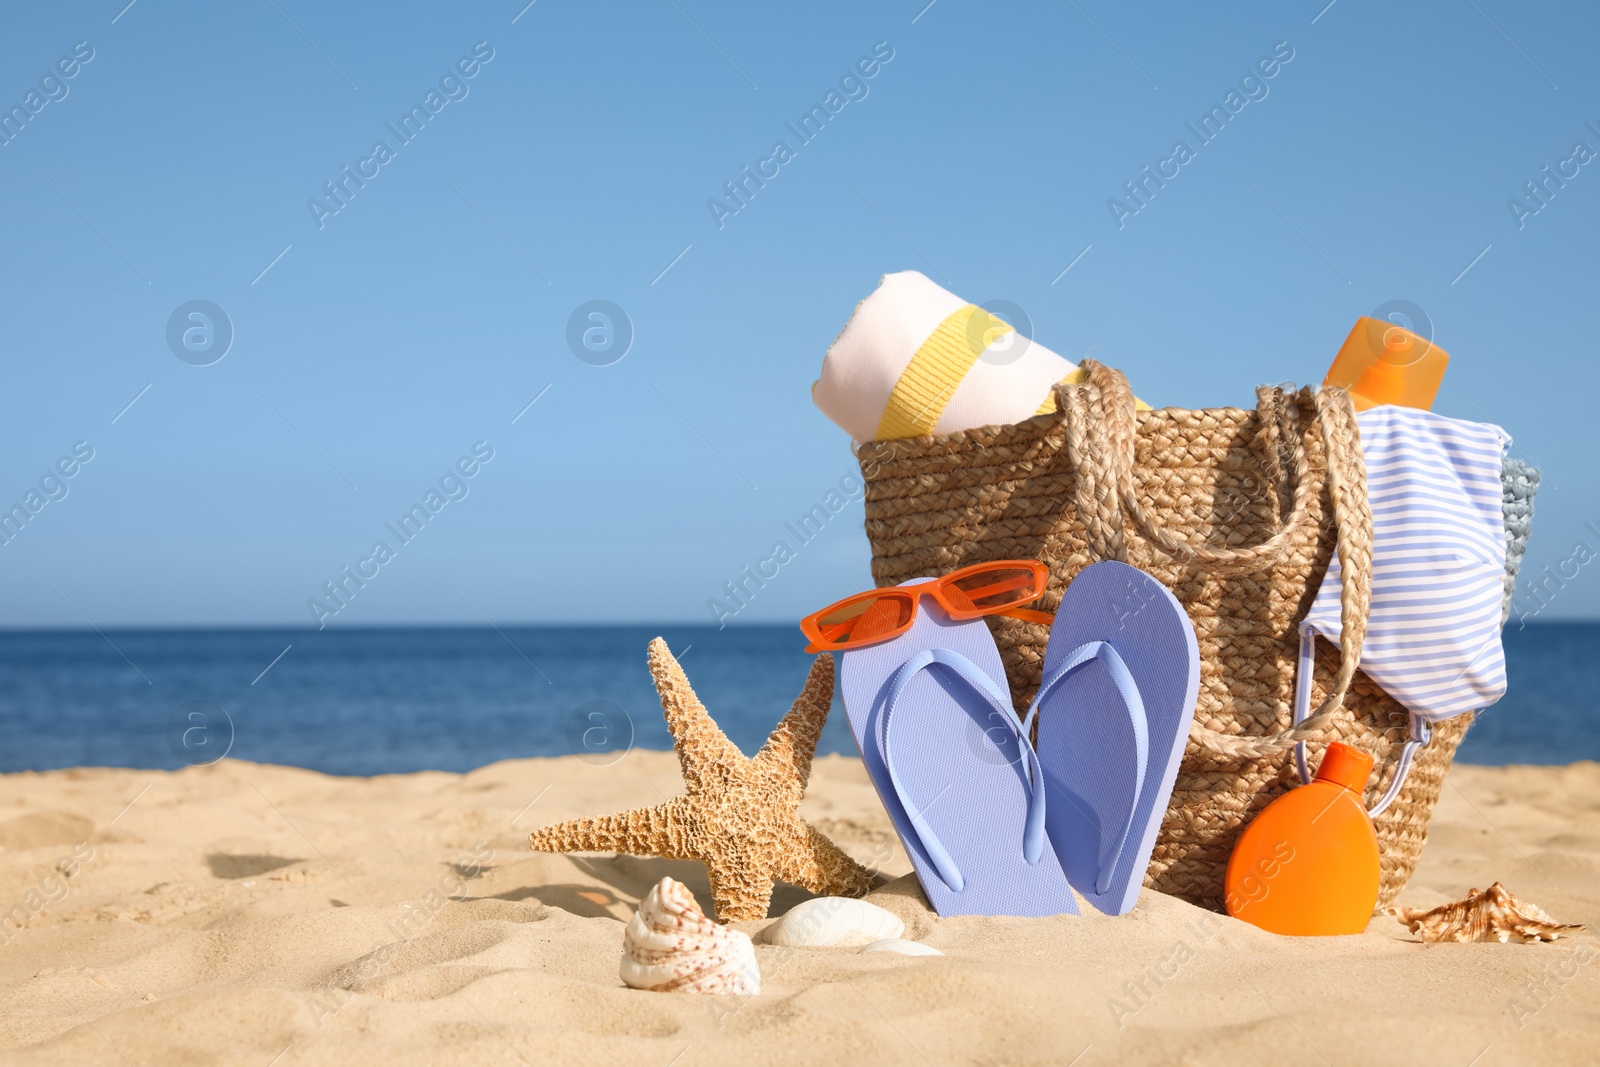 Photo of Bag and beach accessories on sand near sea. Space for text